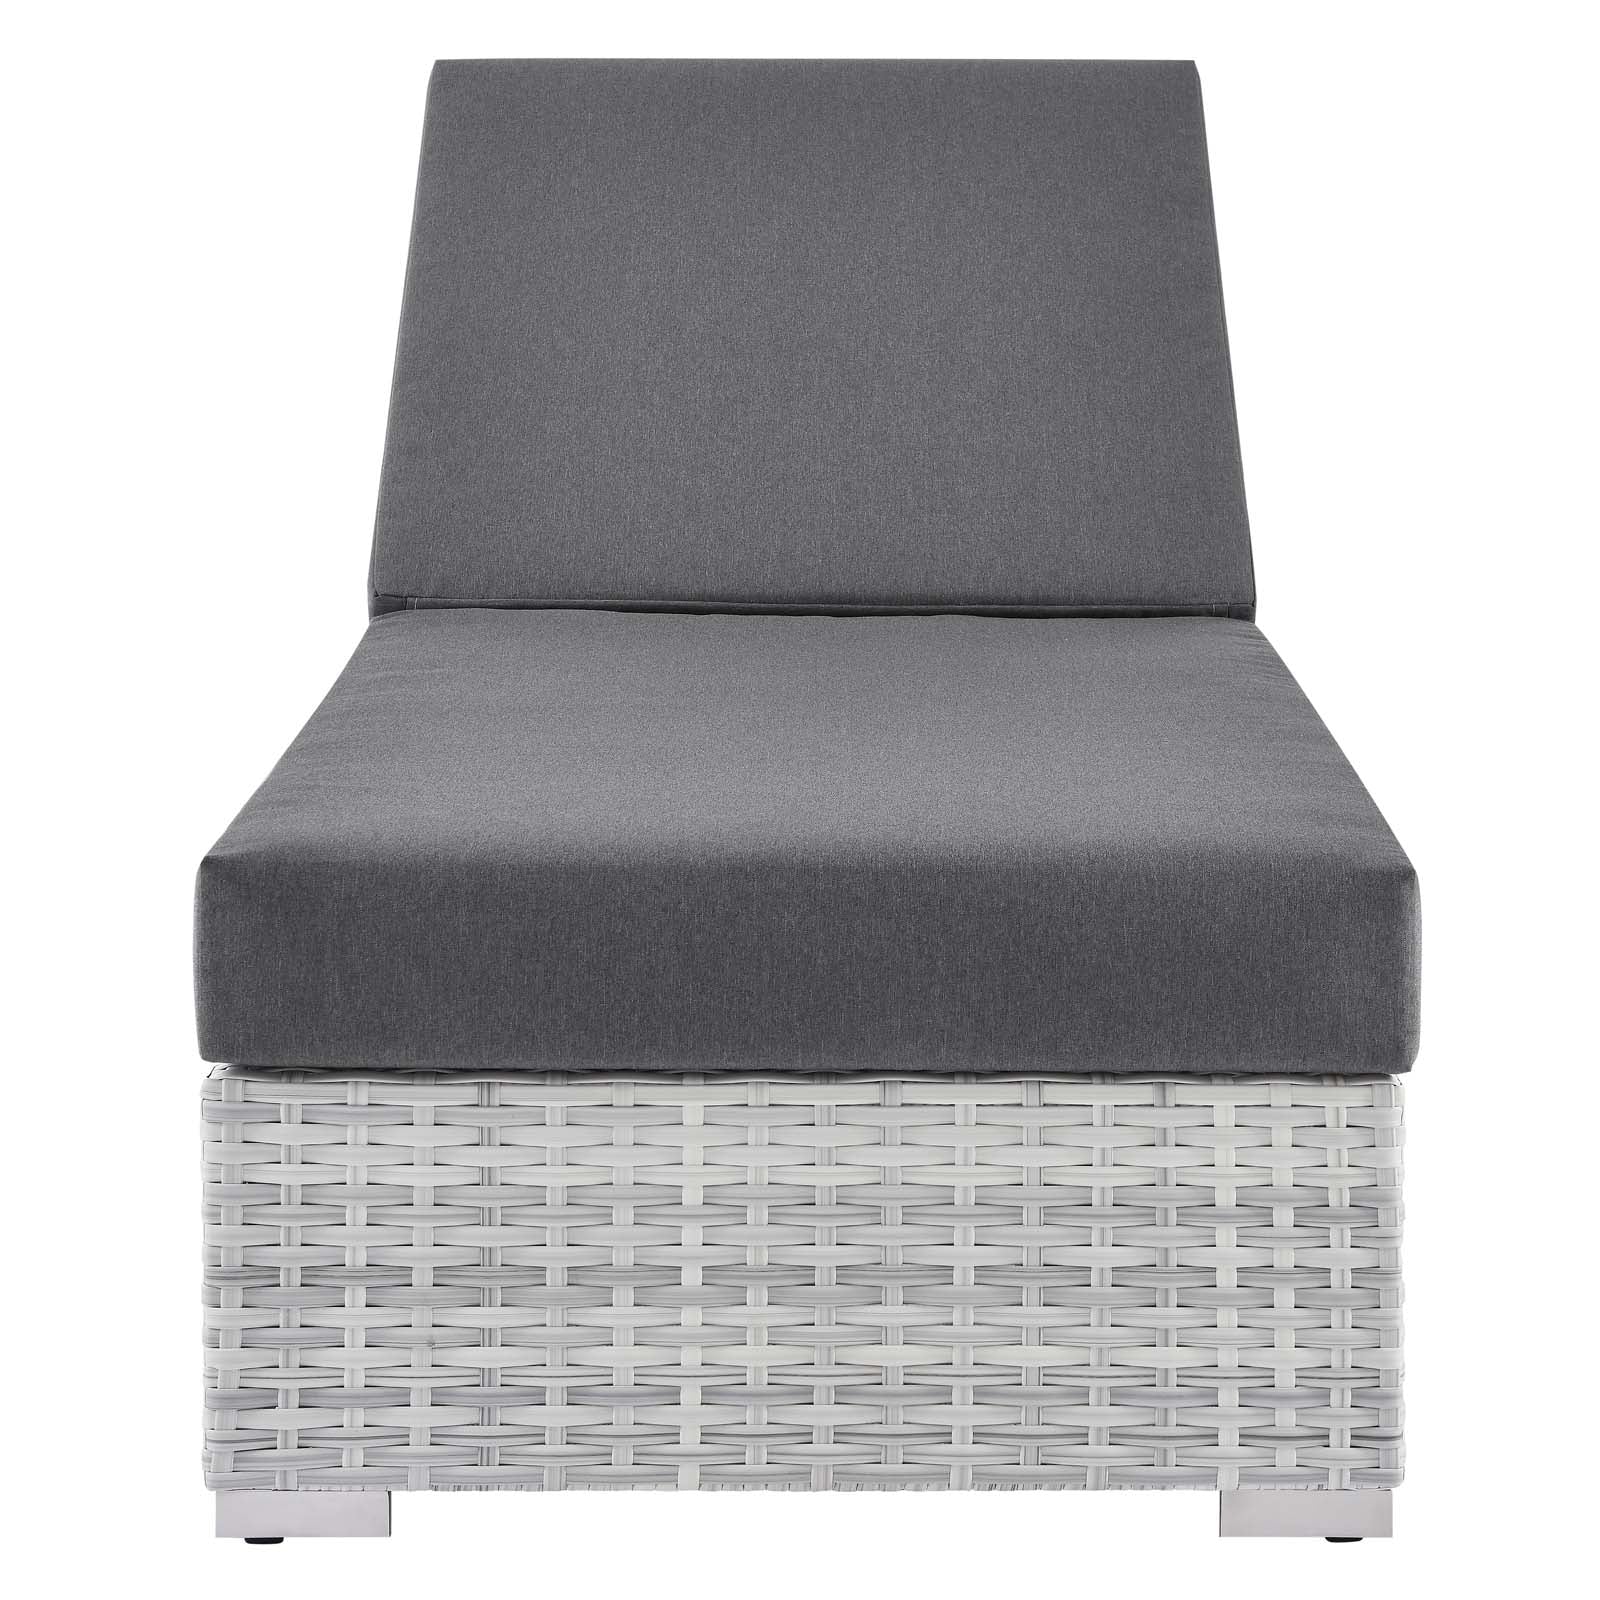 Modway Outdoor Conversation Sets - Convene-Outdoor-Patio-Chaise-Light-Gray-Charcoal